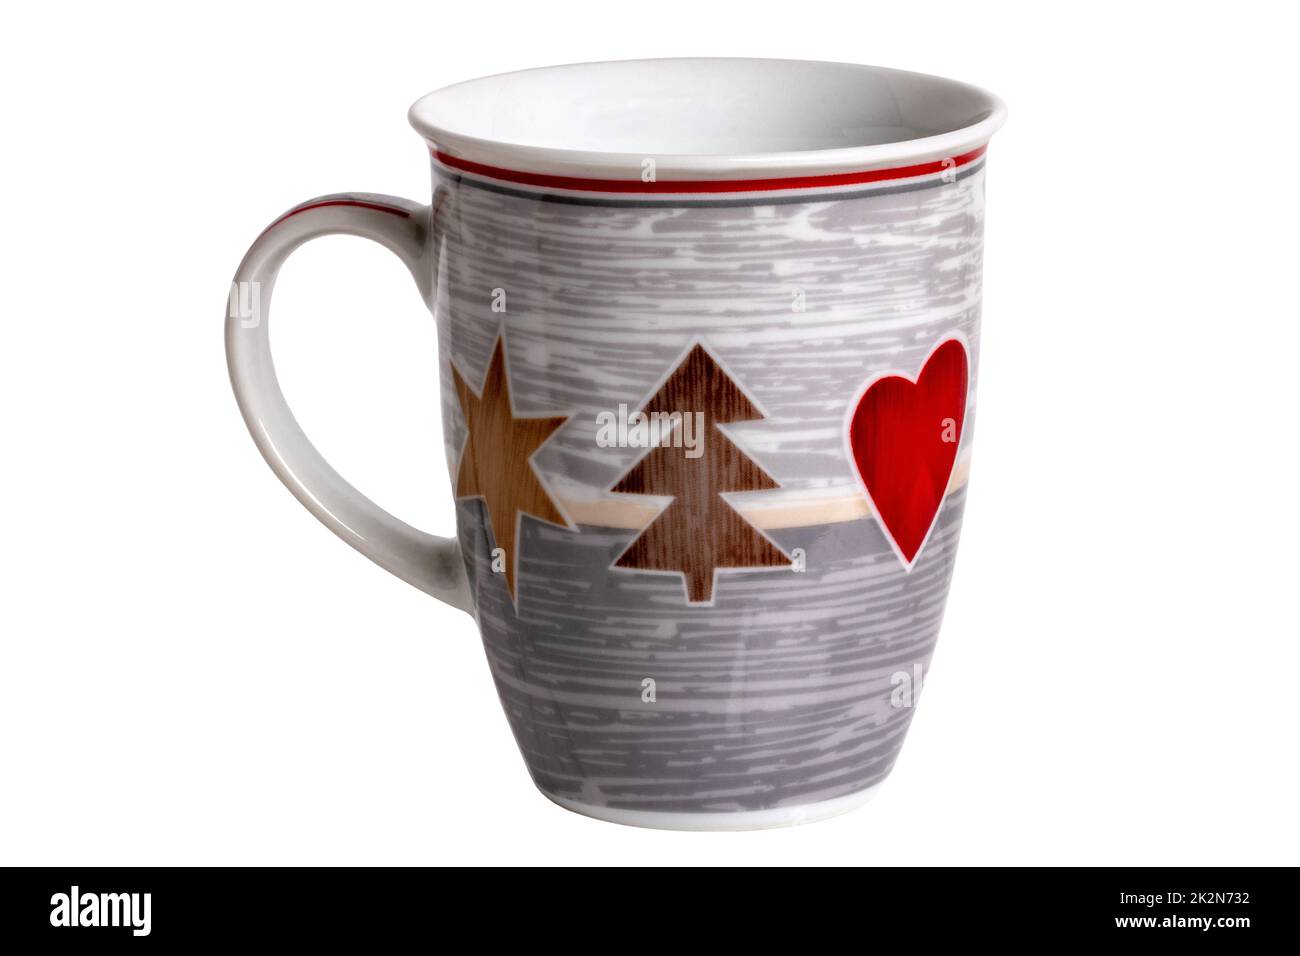 Closeup of a grey and white ceramic mug with printed Christmas motifs, such as a fir tree, star and heart isolated on a white background. Clipping path. Macro. Stock Photo